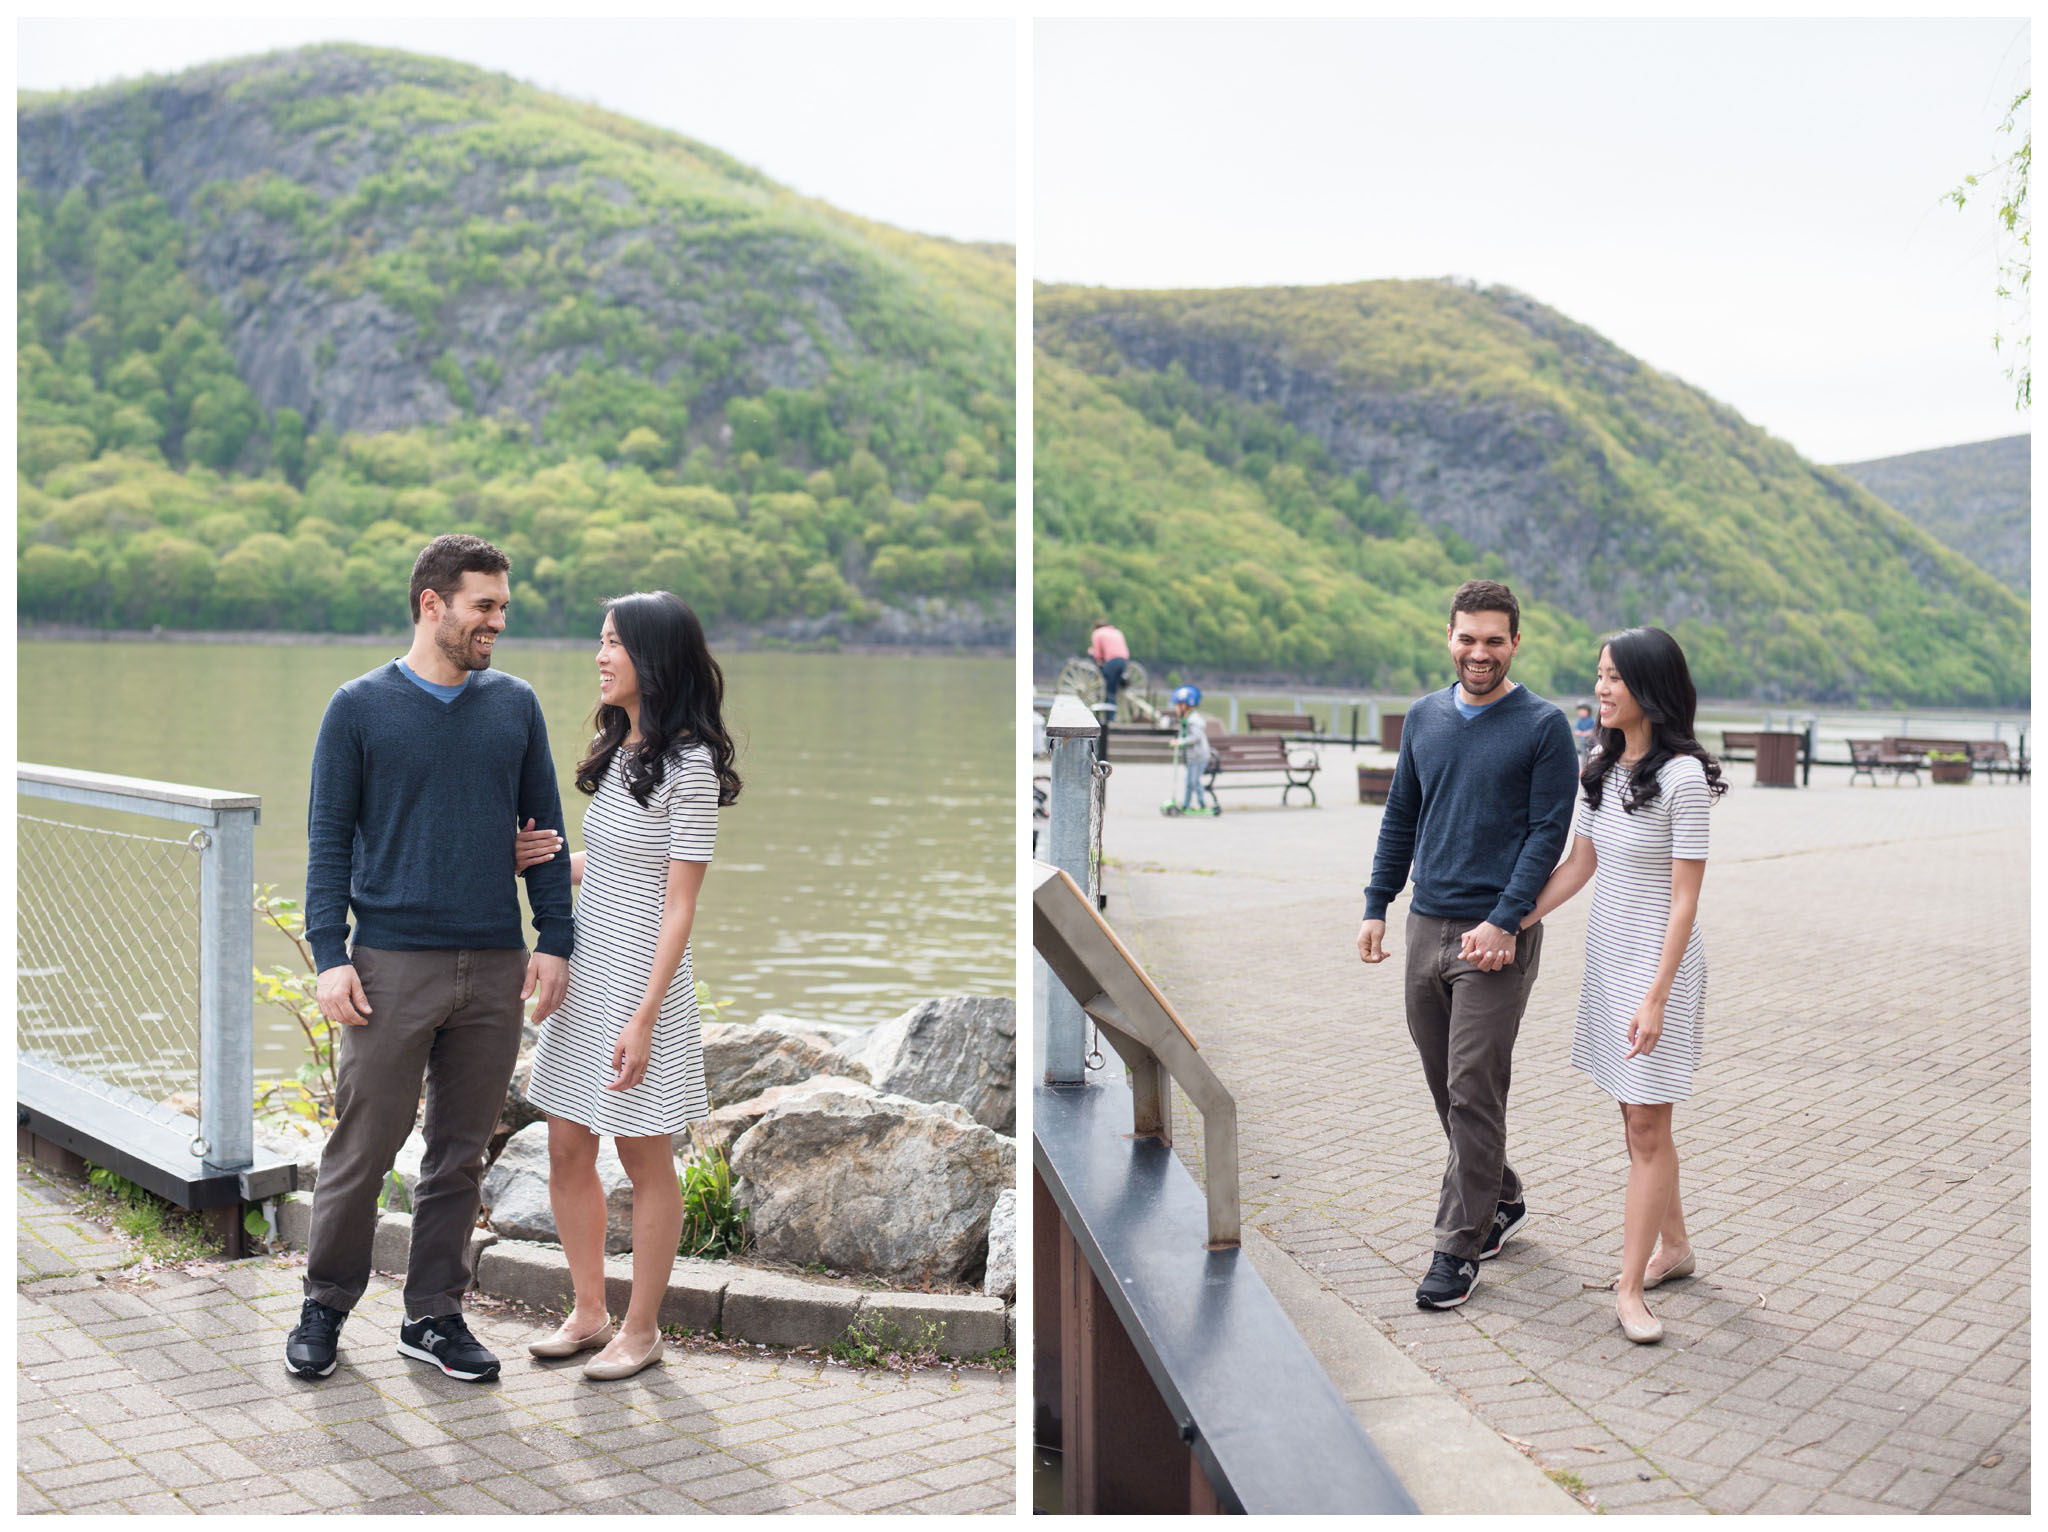 cold spring putnam county engagement photographer hudson valley ny